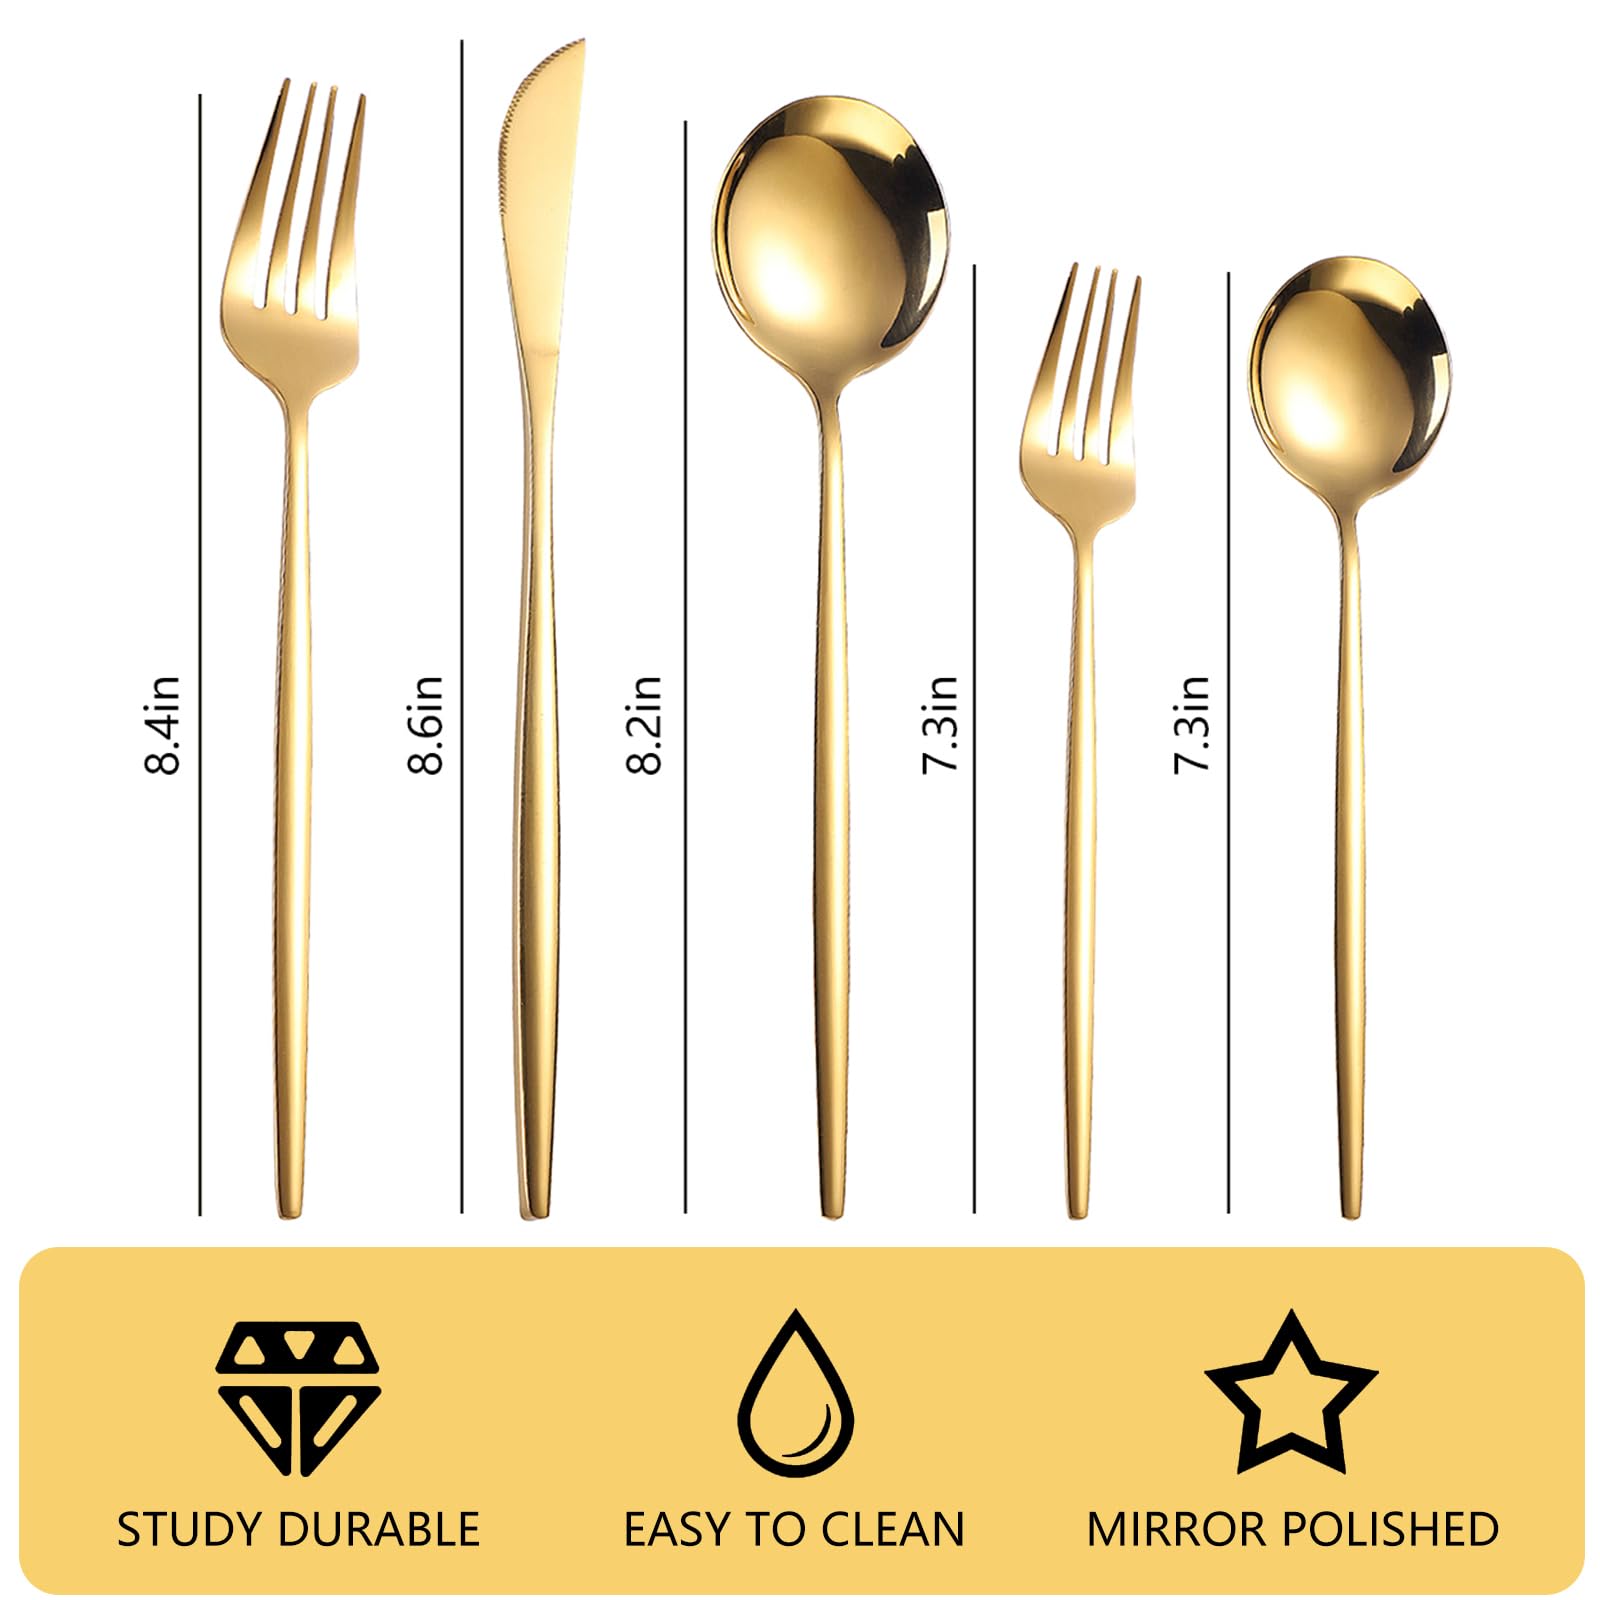 Gold Silverware Set, 30-Piece Stainless Steel Flatware Set Mirror Polished Cutlery Utensil Set Service for 6, Durable Home Kitchen Eating Tableware Set, Include Fork Knife Spoon Set, Dishwasher Safe